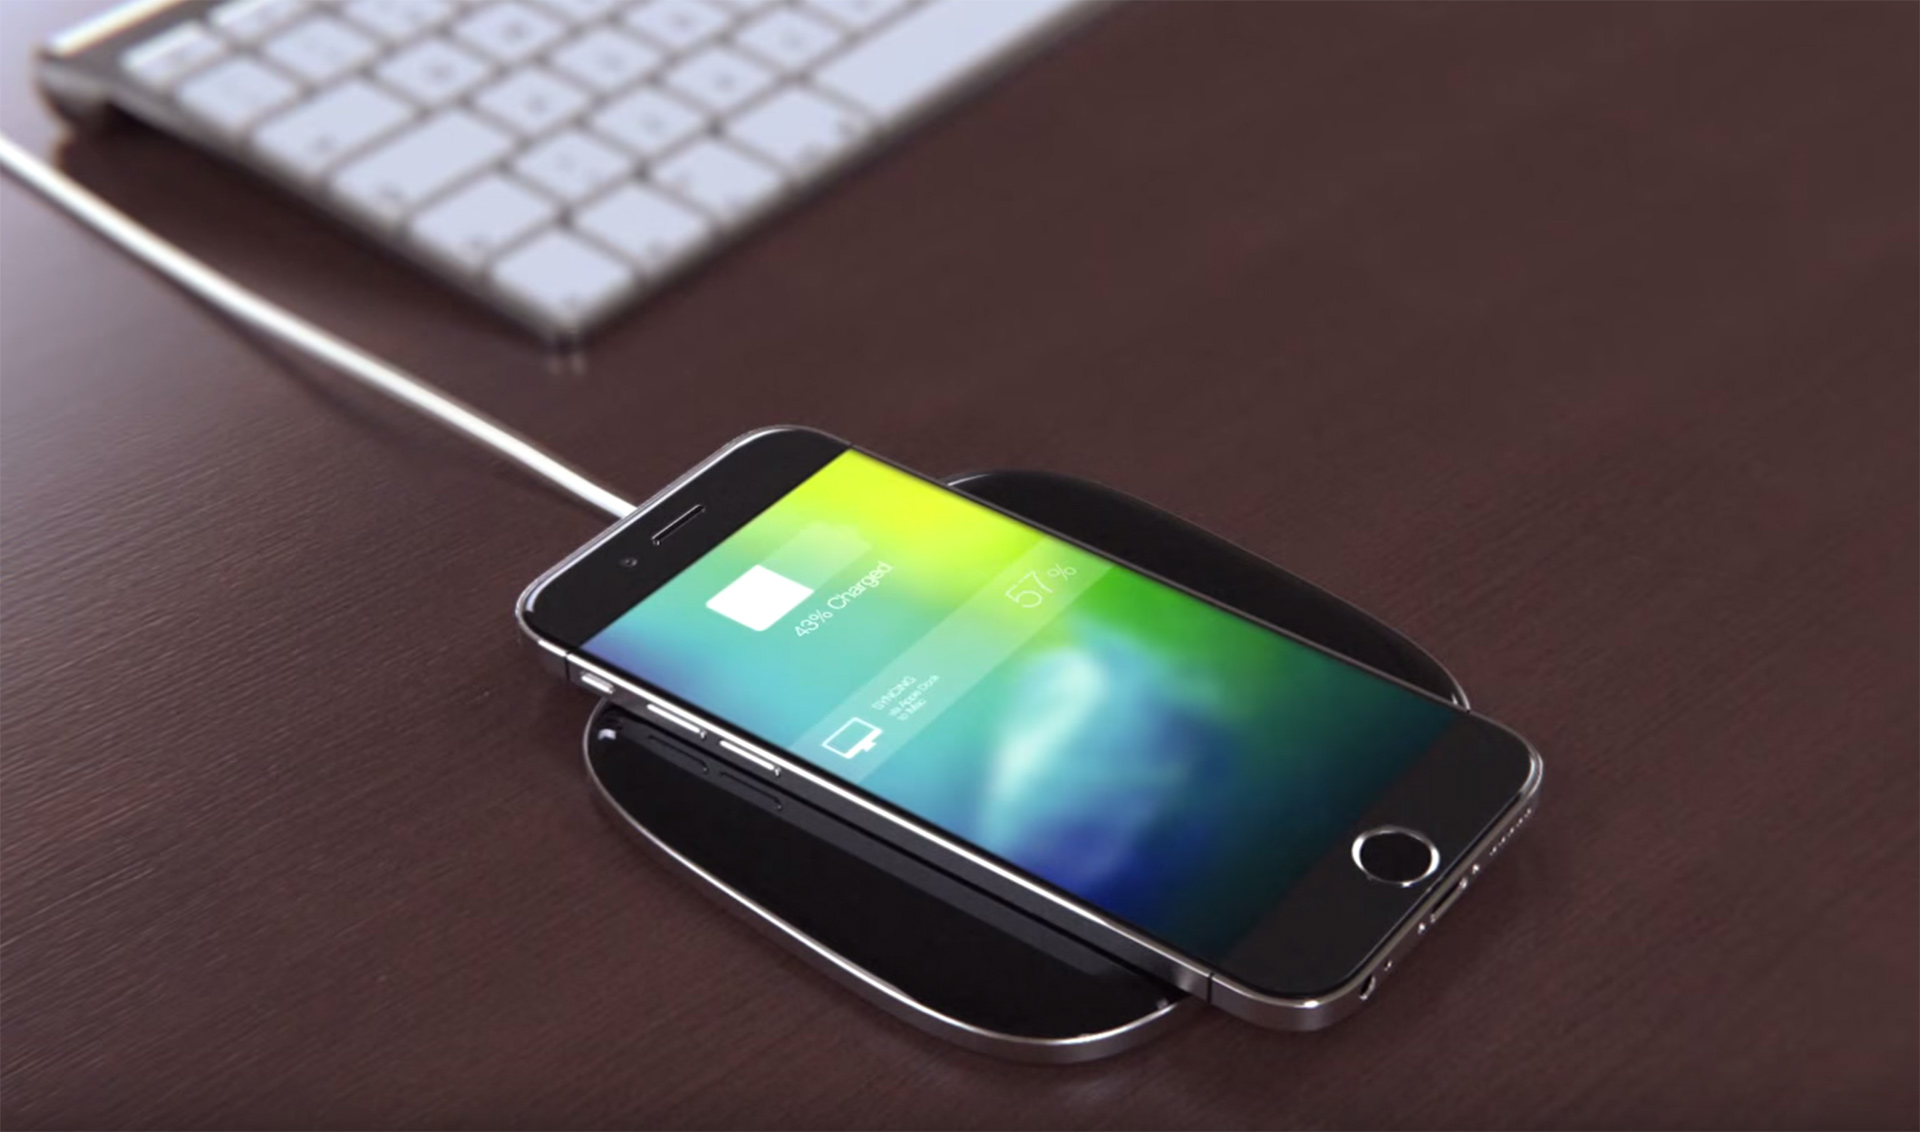 Video: check out an “iPhone 7” concept, with inductive charger